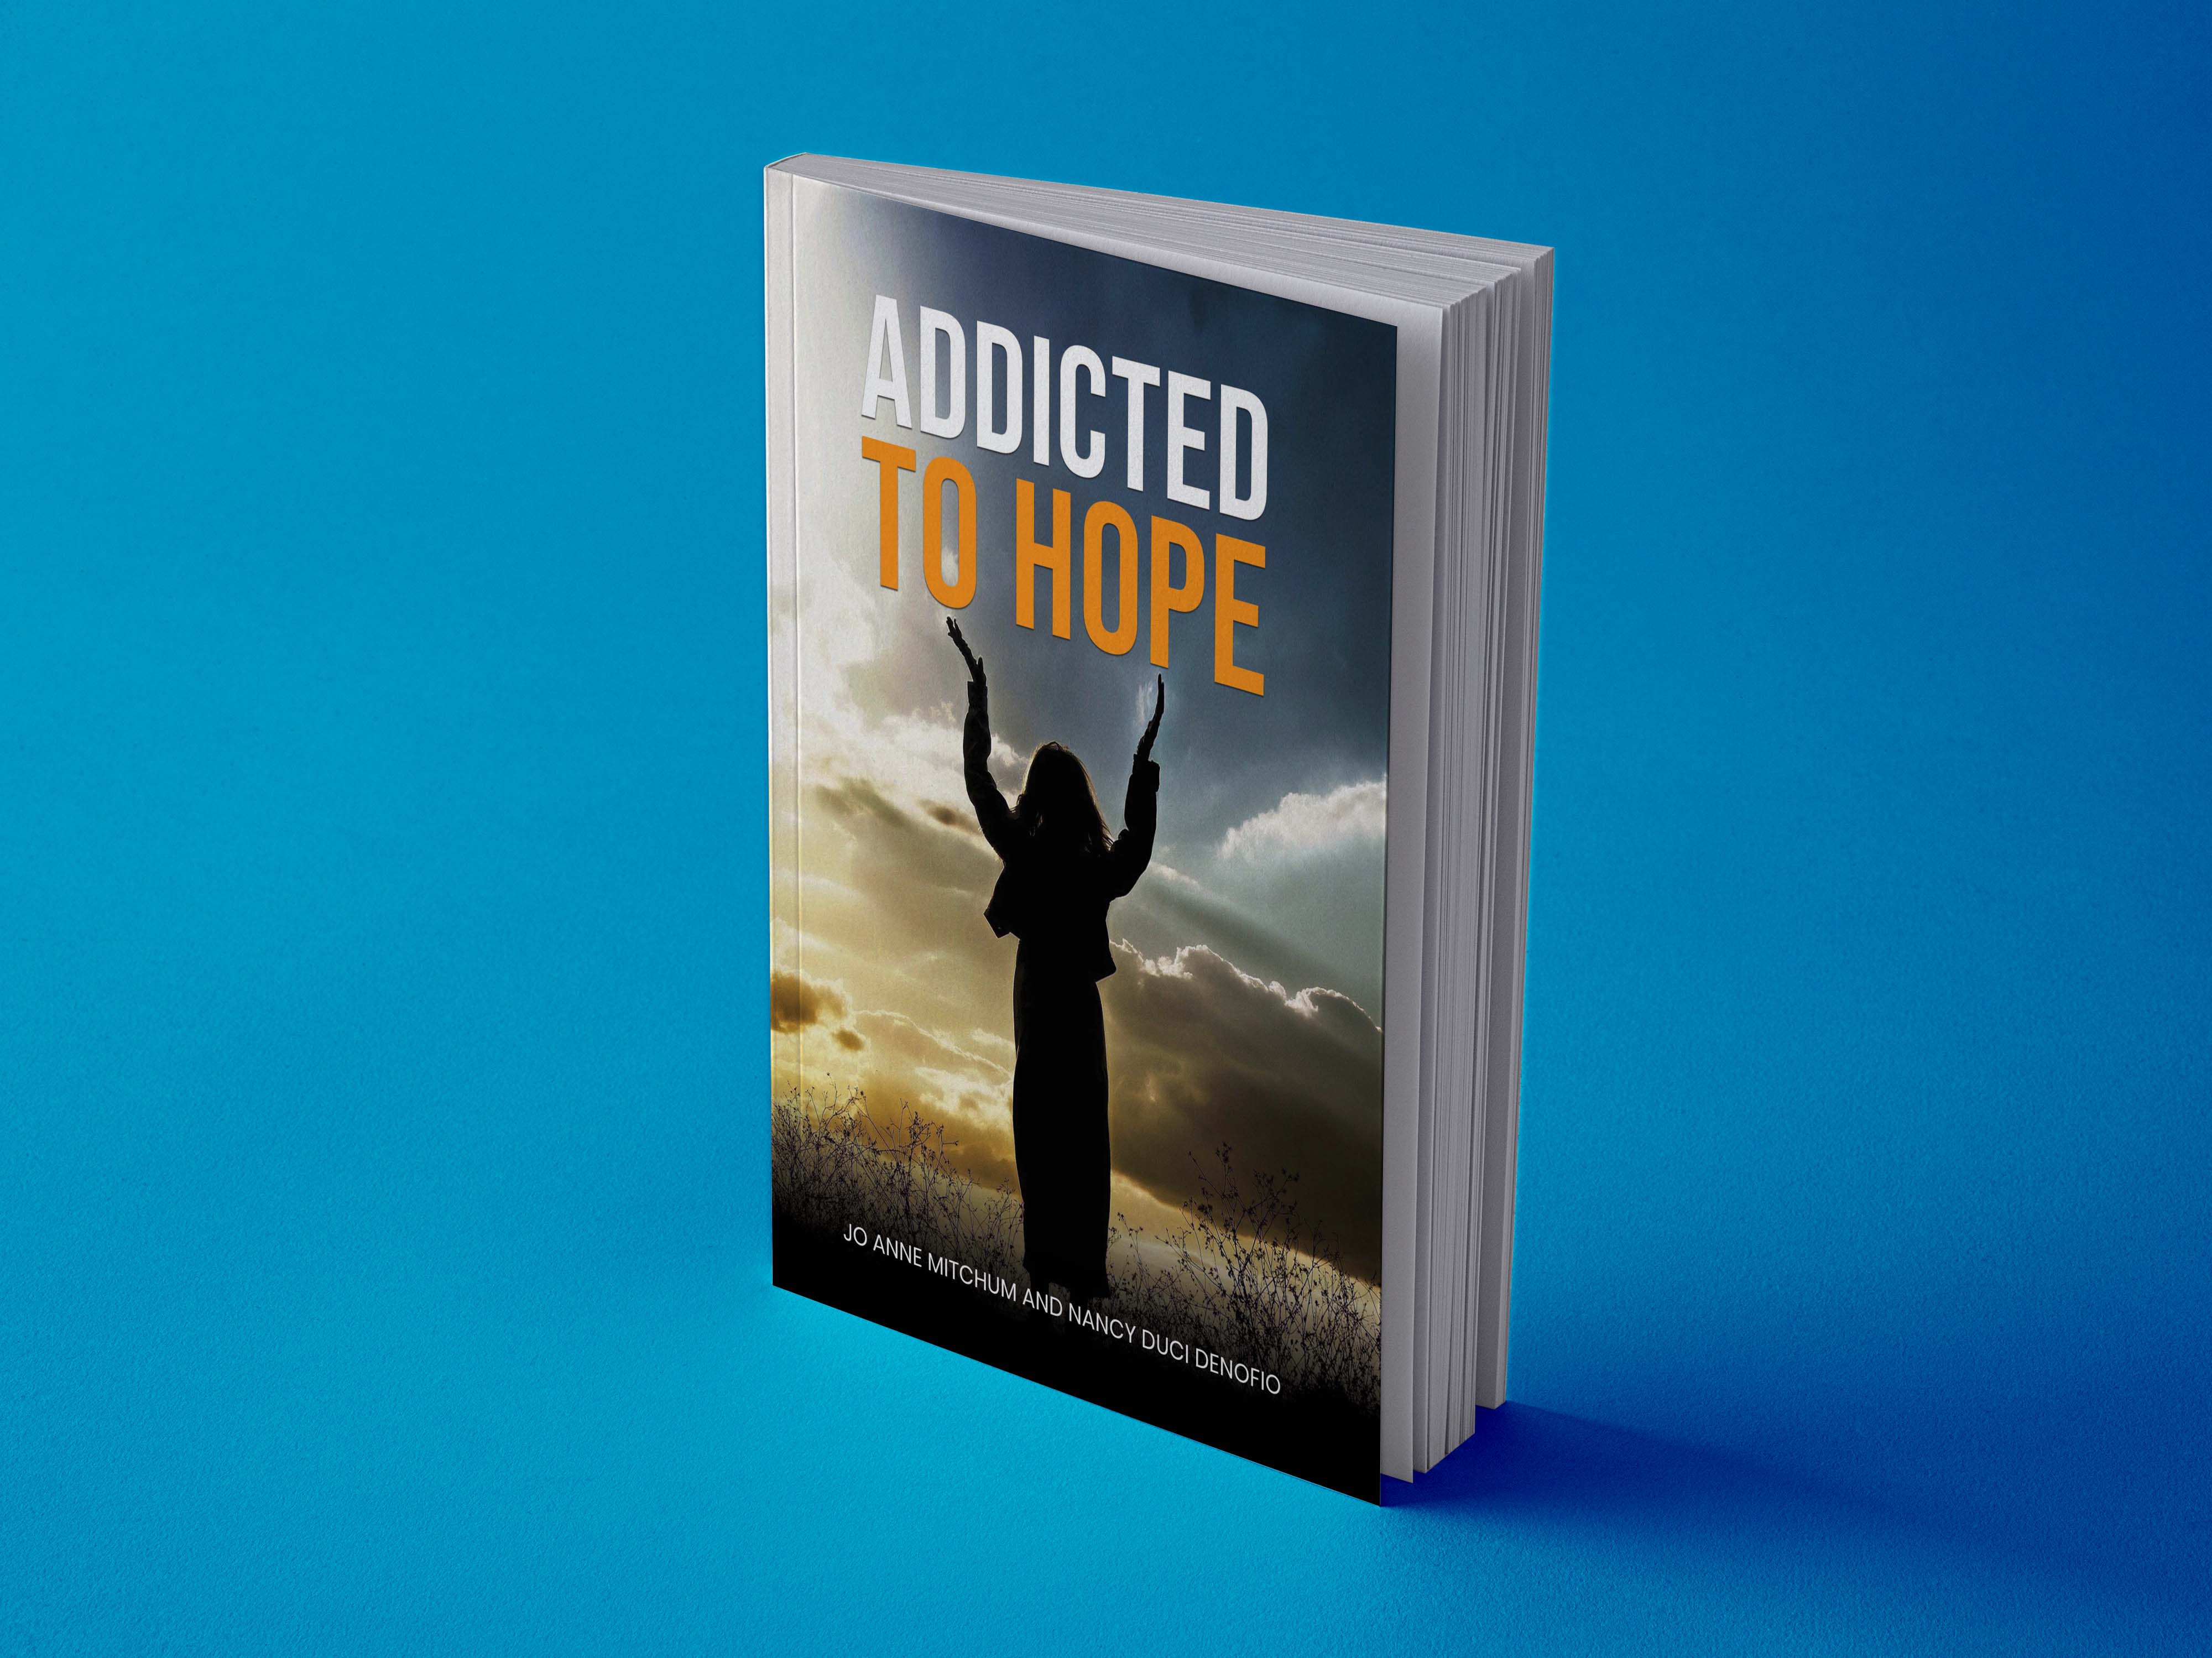 Jo Anne Mitchum and Nancy Duci Denofio just published a new book "Addicted to Hope"